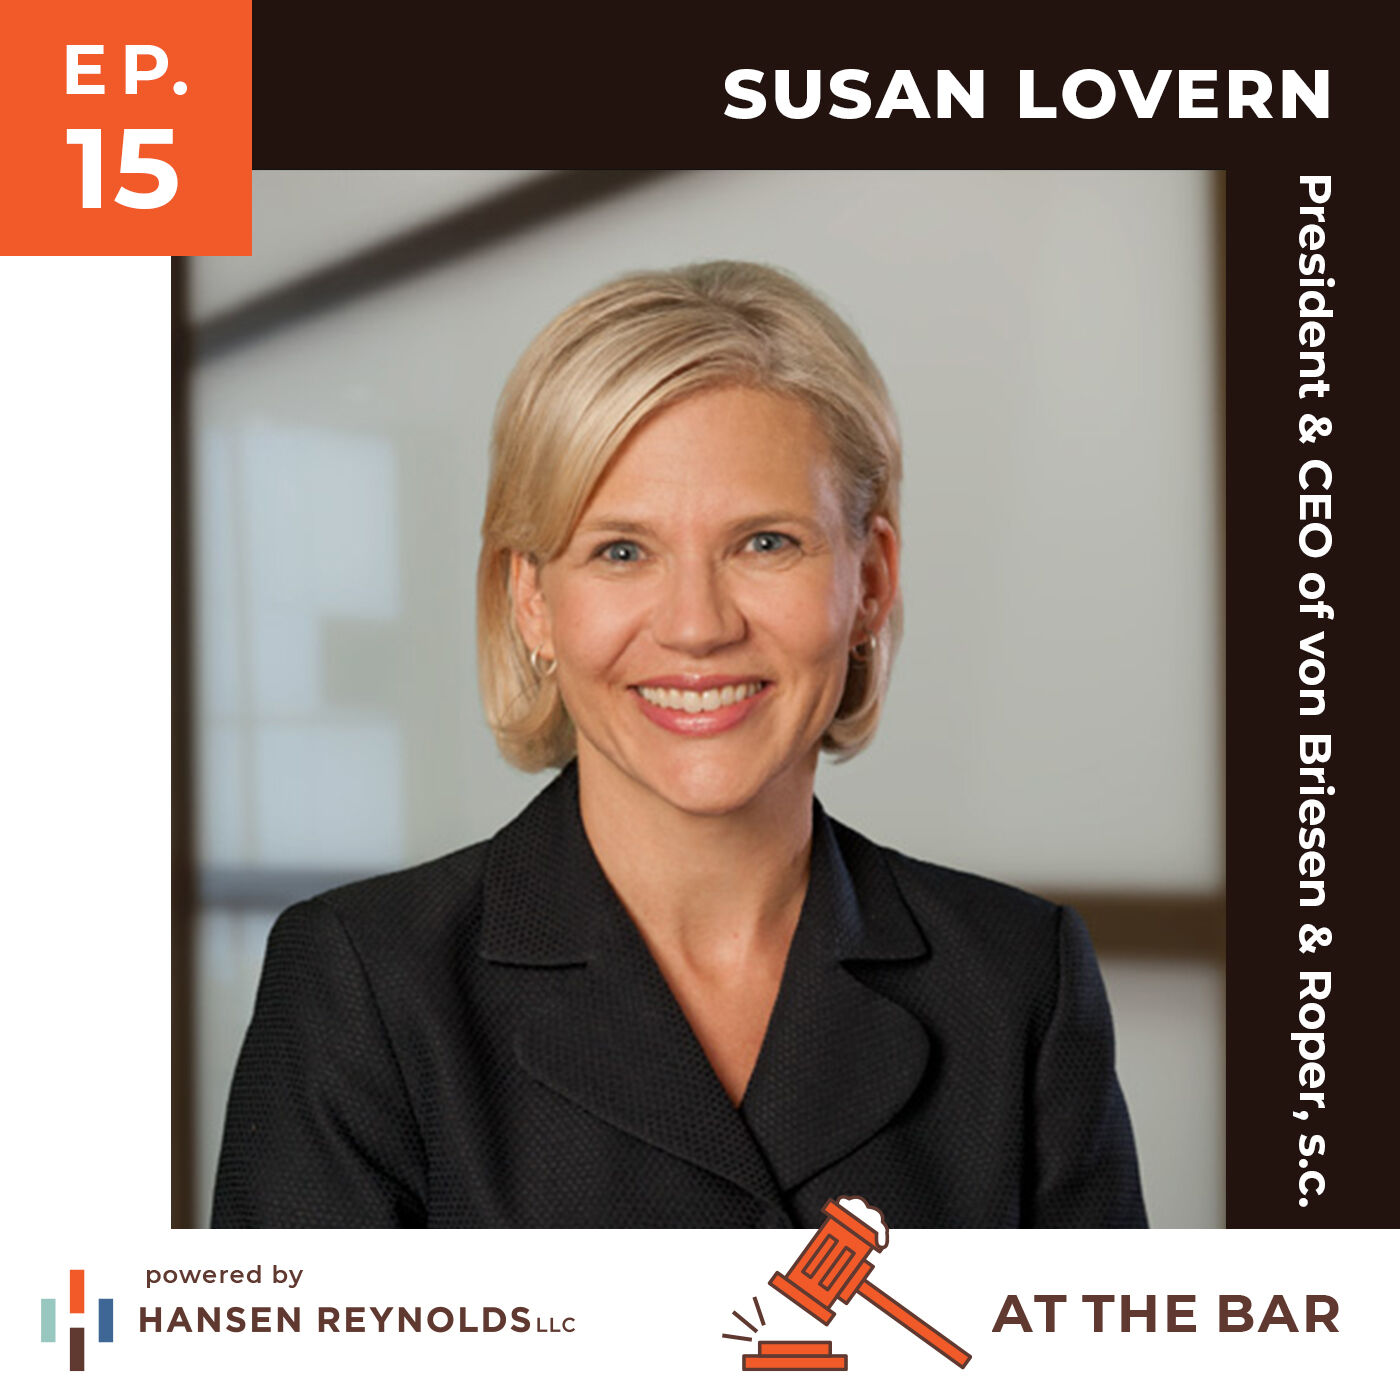 At the Bar episode fifteen cover with Susan Lovern